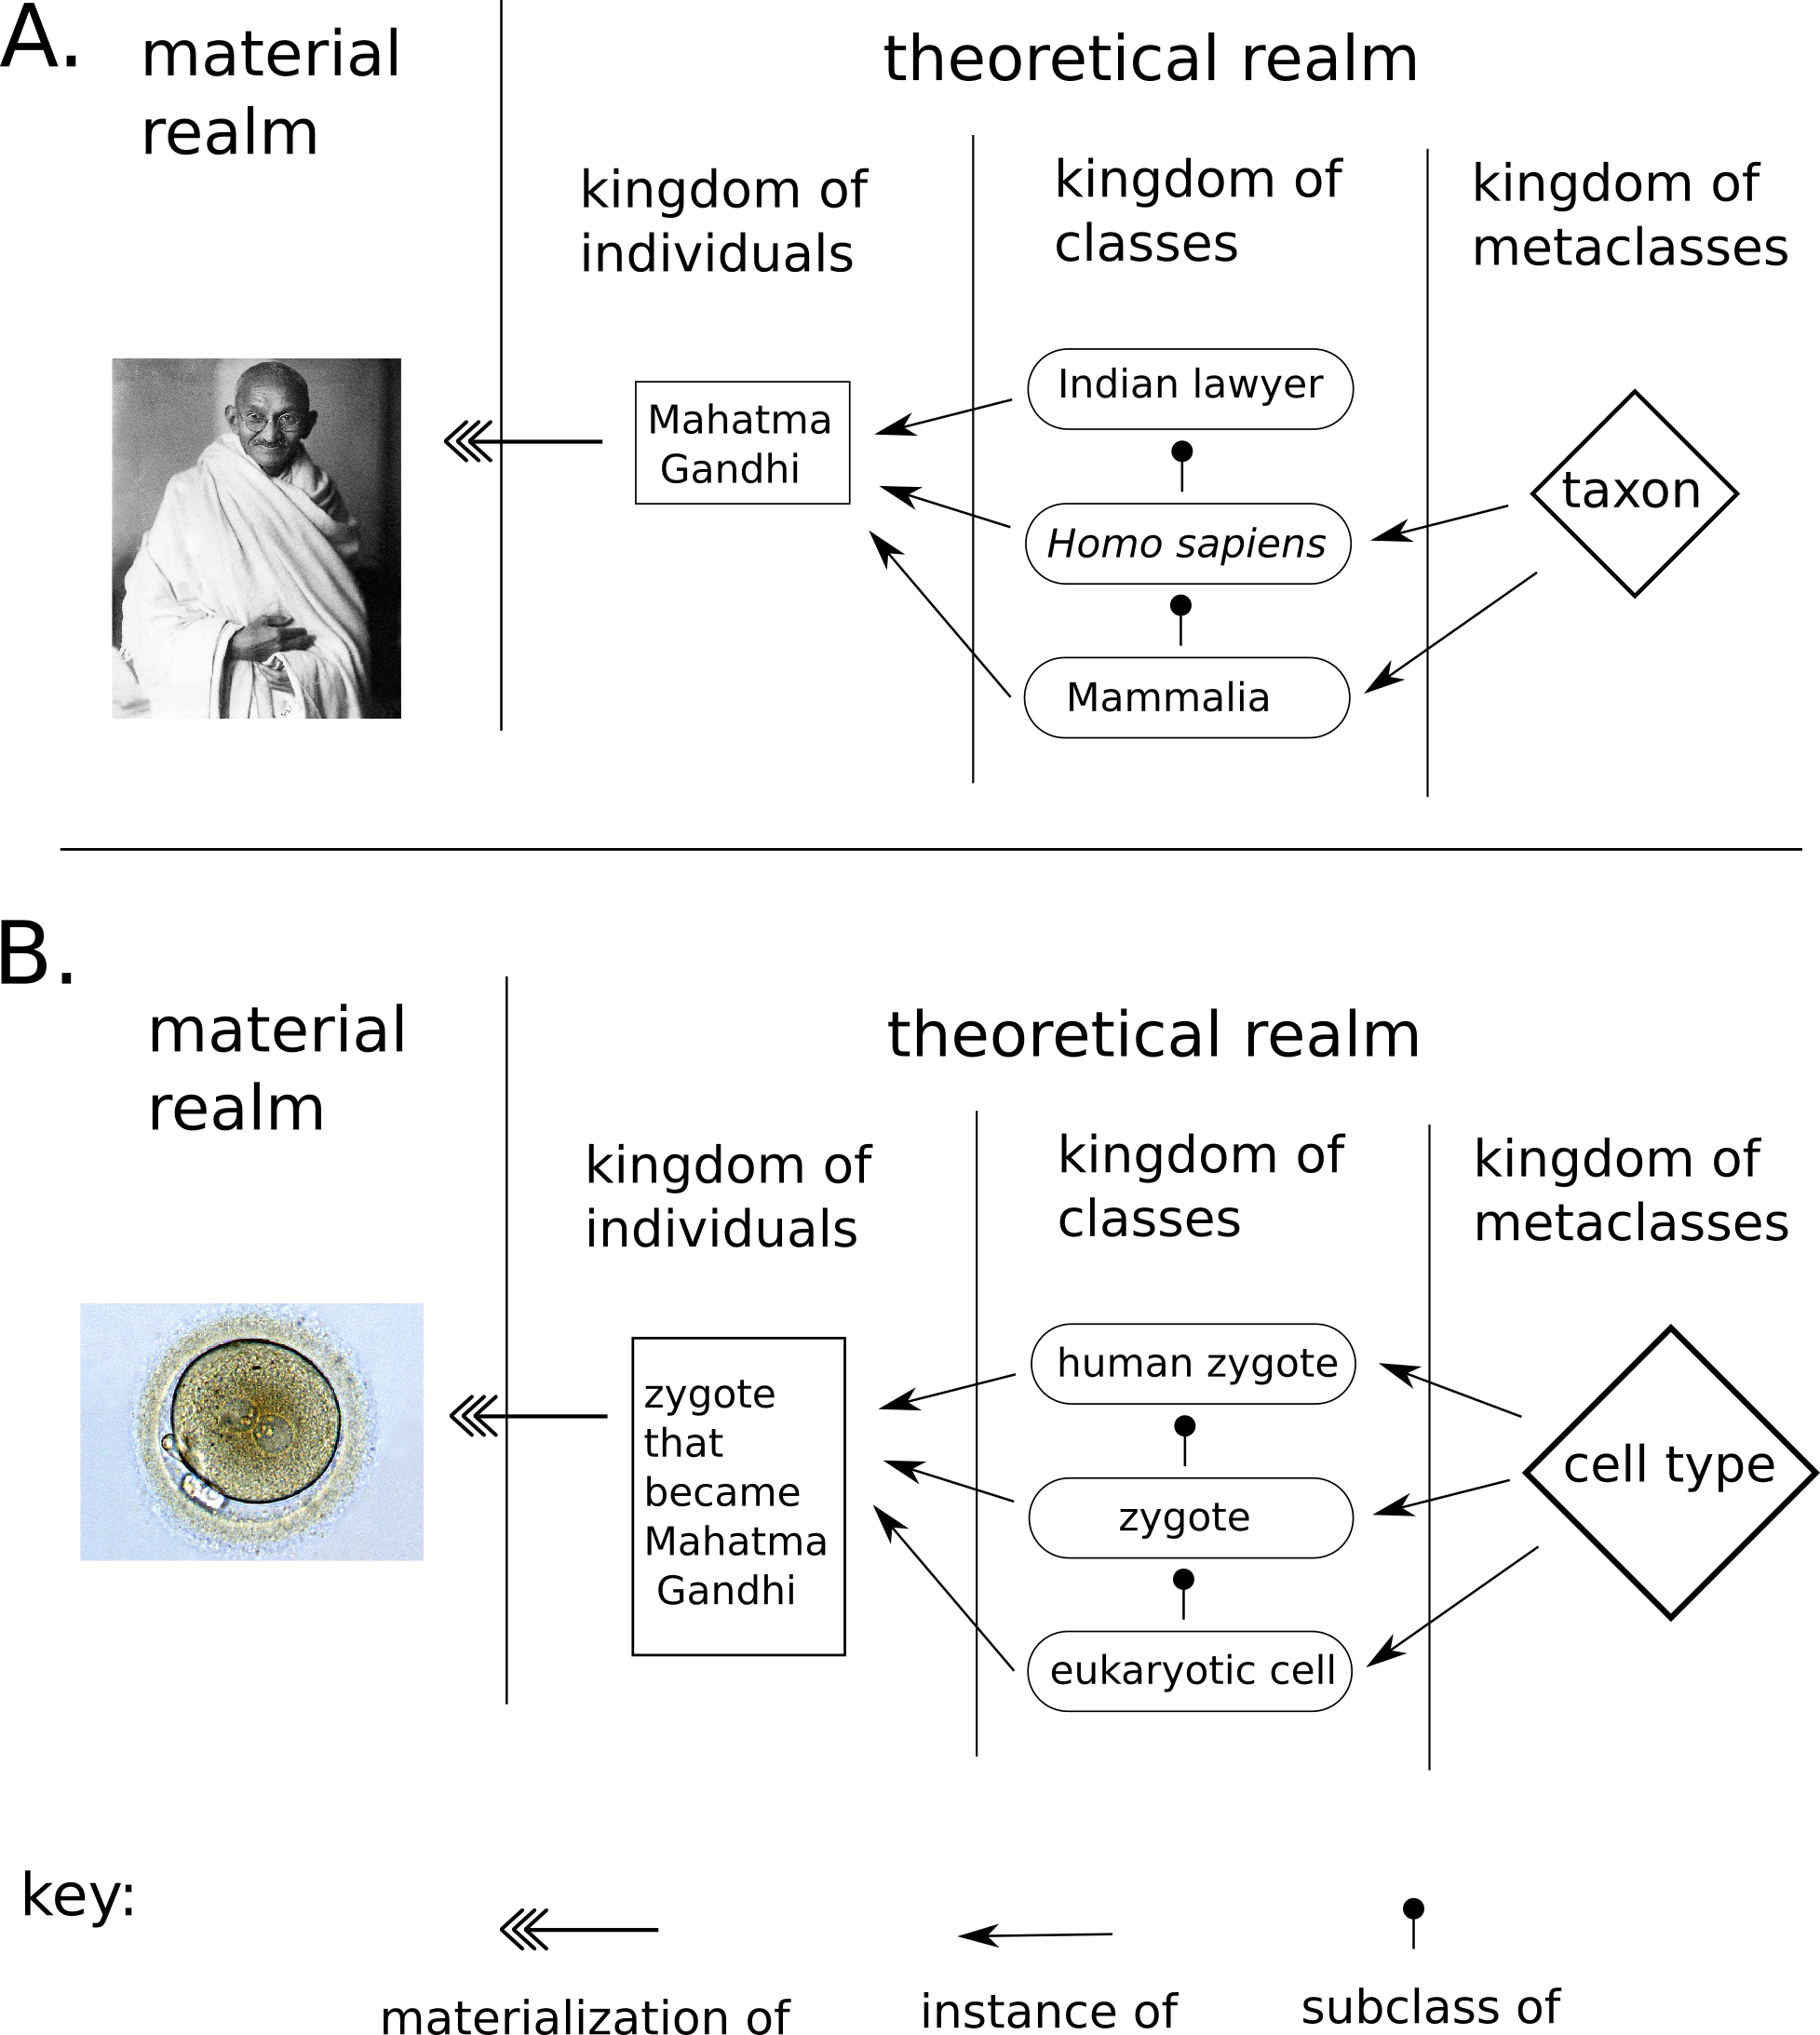 Figure 5: A multilevel theory (MLT) can divide the theoretical realm into different kingdoms. A) A representation of people in the MLT framework as adopted in this work. The theoretical-realm entity “Mahatma Gandhi” is materialized by the material-realm Mahatma Gandhi. The theoretical individual is considered an instance of multiple classes such as “Indian lawyer” and “Homo sapiens”, which are related to each other via subclass relations. The classes themselves are instances of metaclasses, like “taxon”, a first-order metaclass. B) An analogous representation of the MLT framework, but applied to cells and cell types.